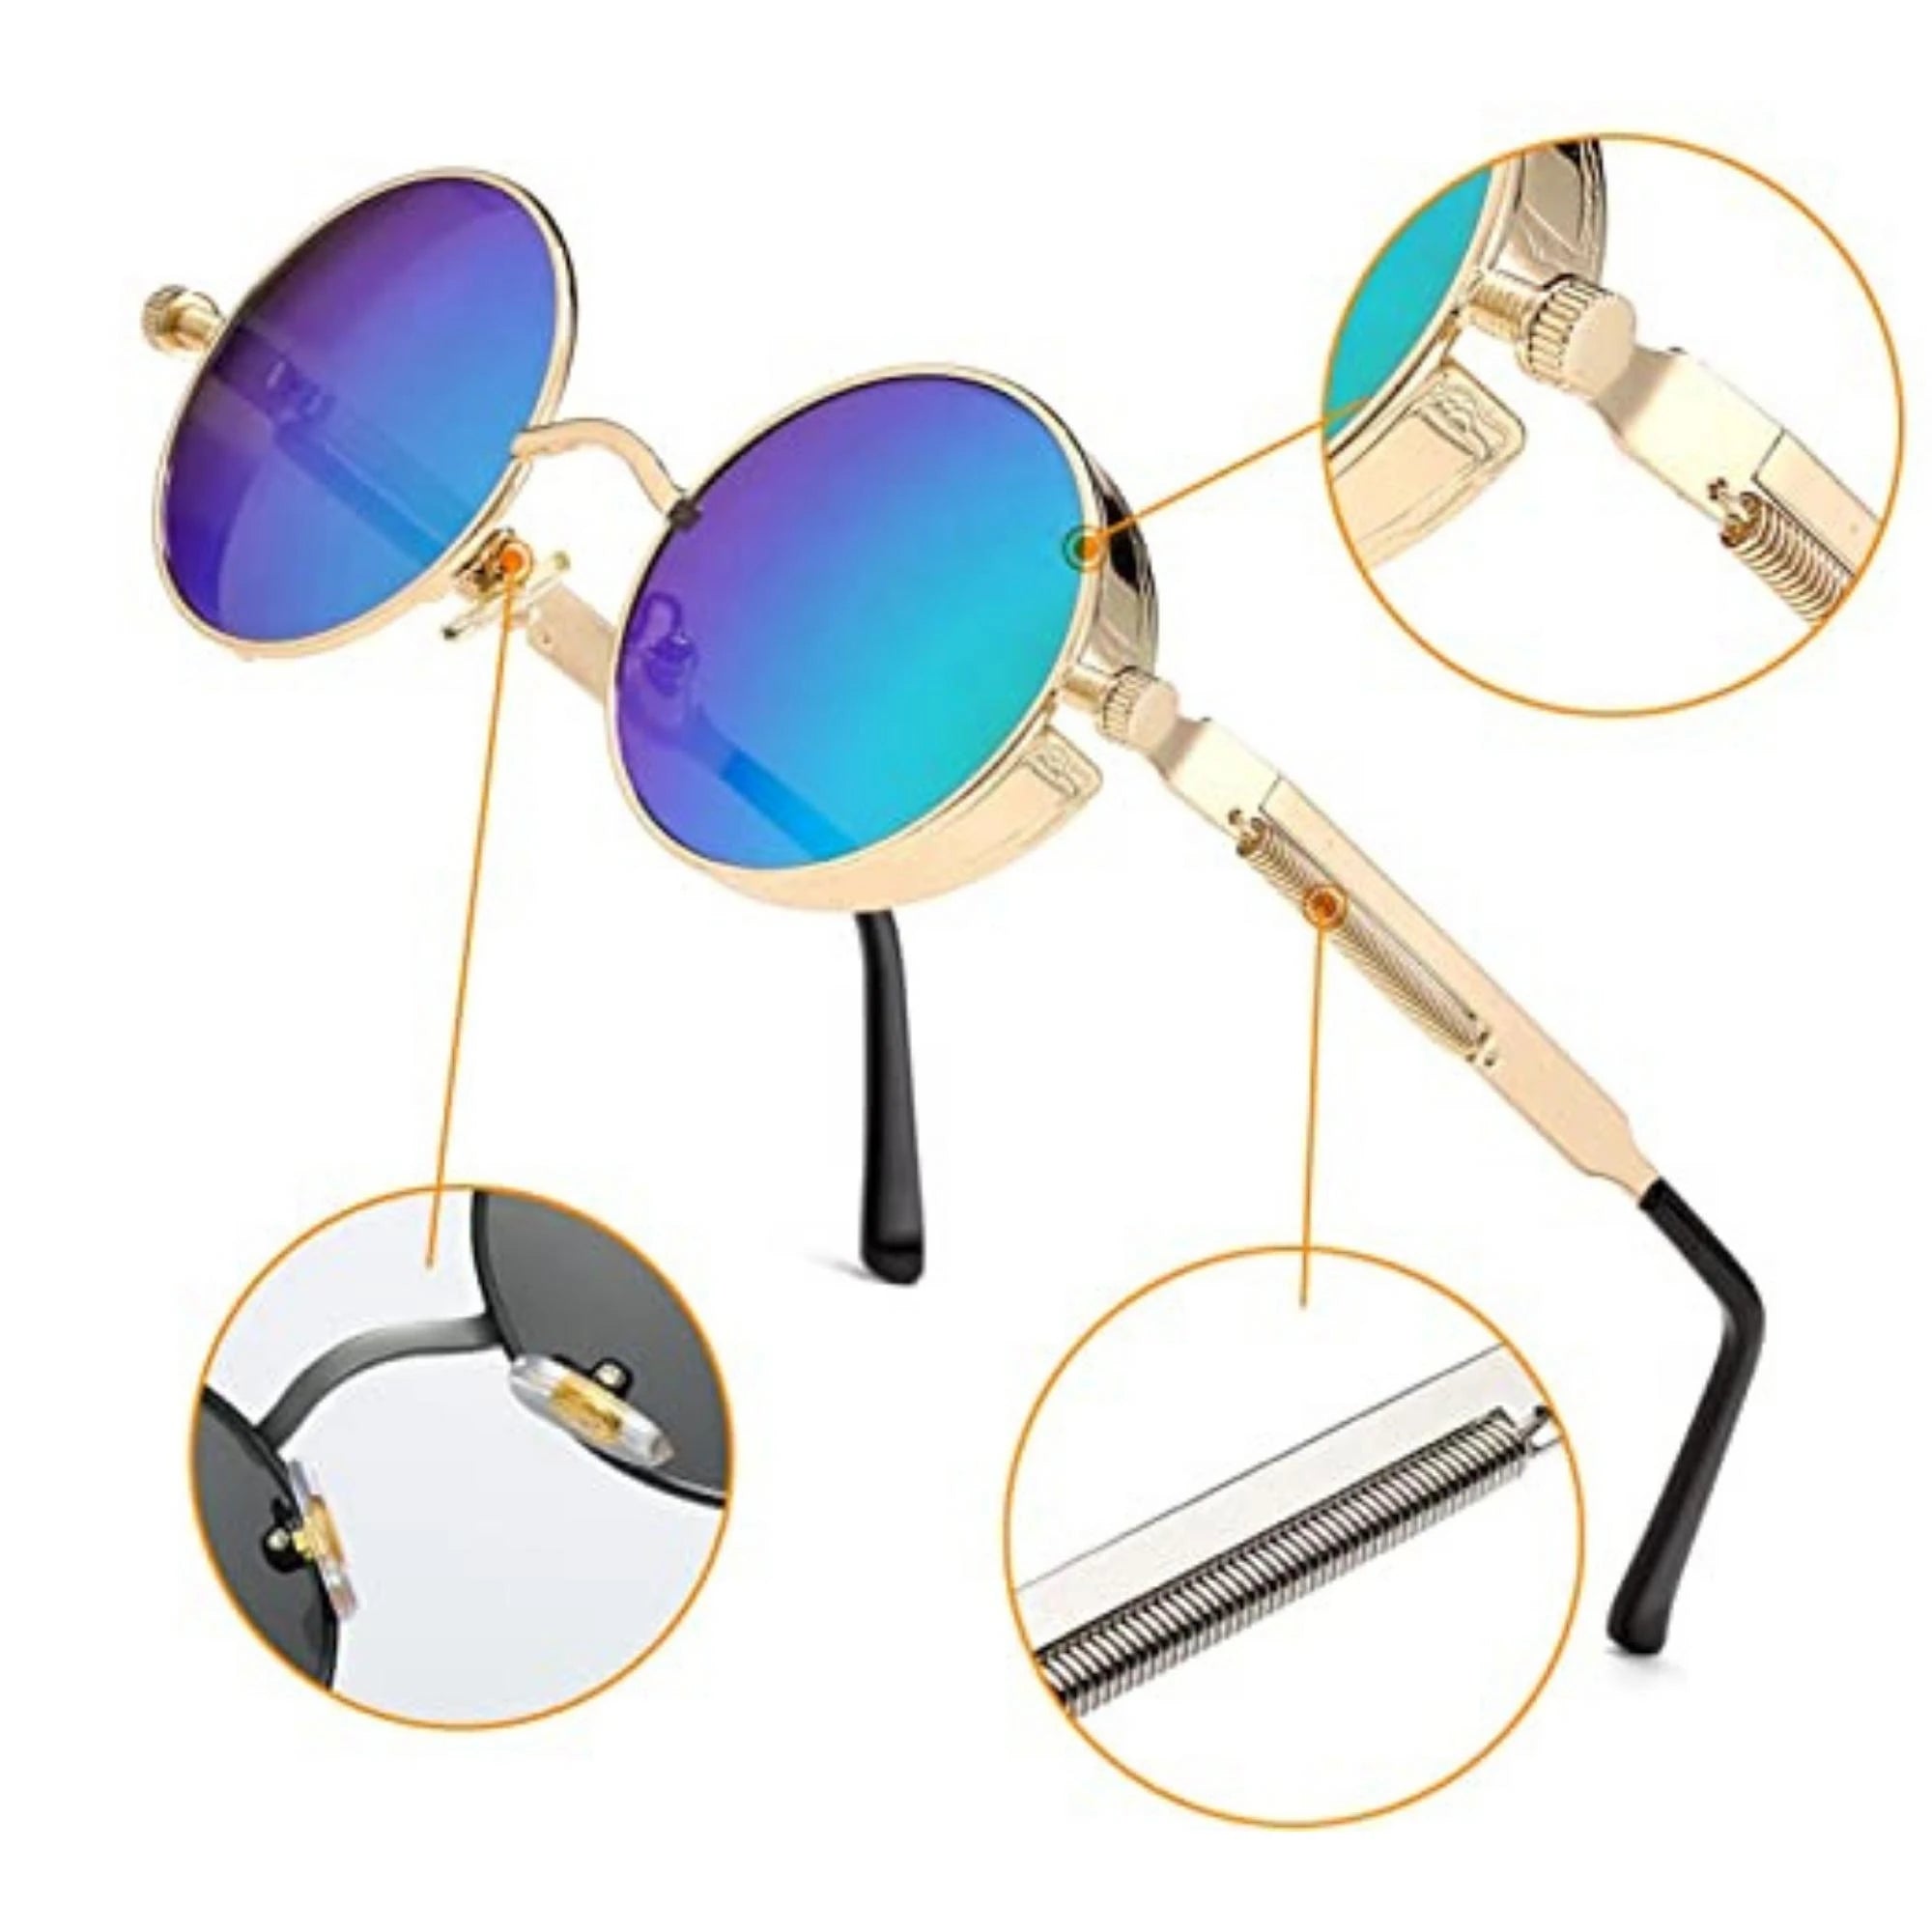 DISC Series Round Steampunk Sunglasses - Gold Frame Blue Mirrored Lens